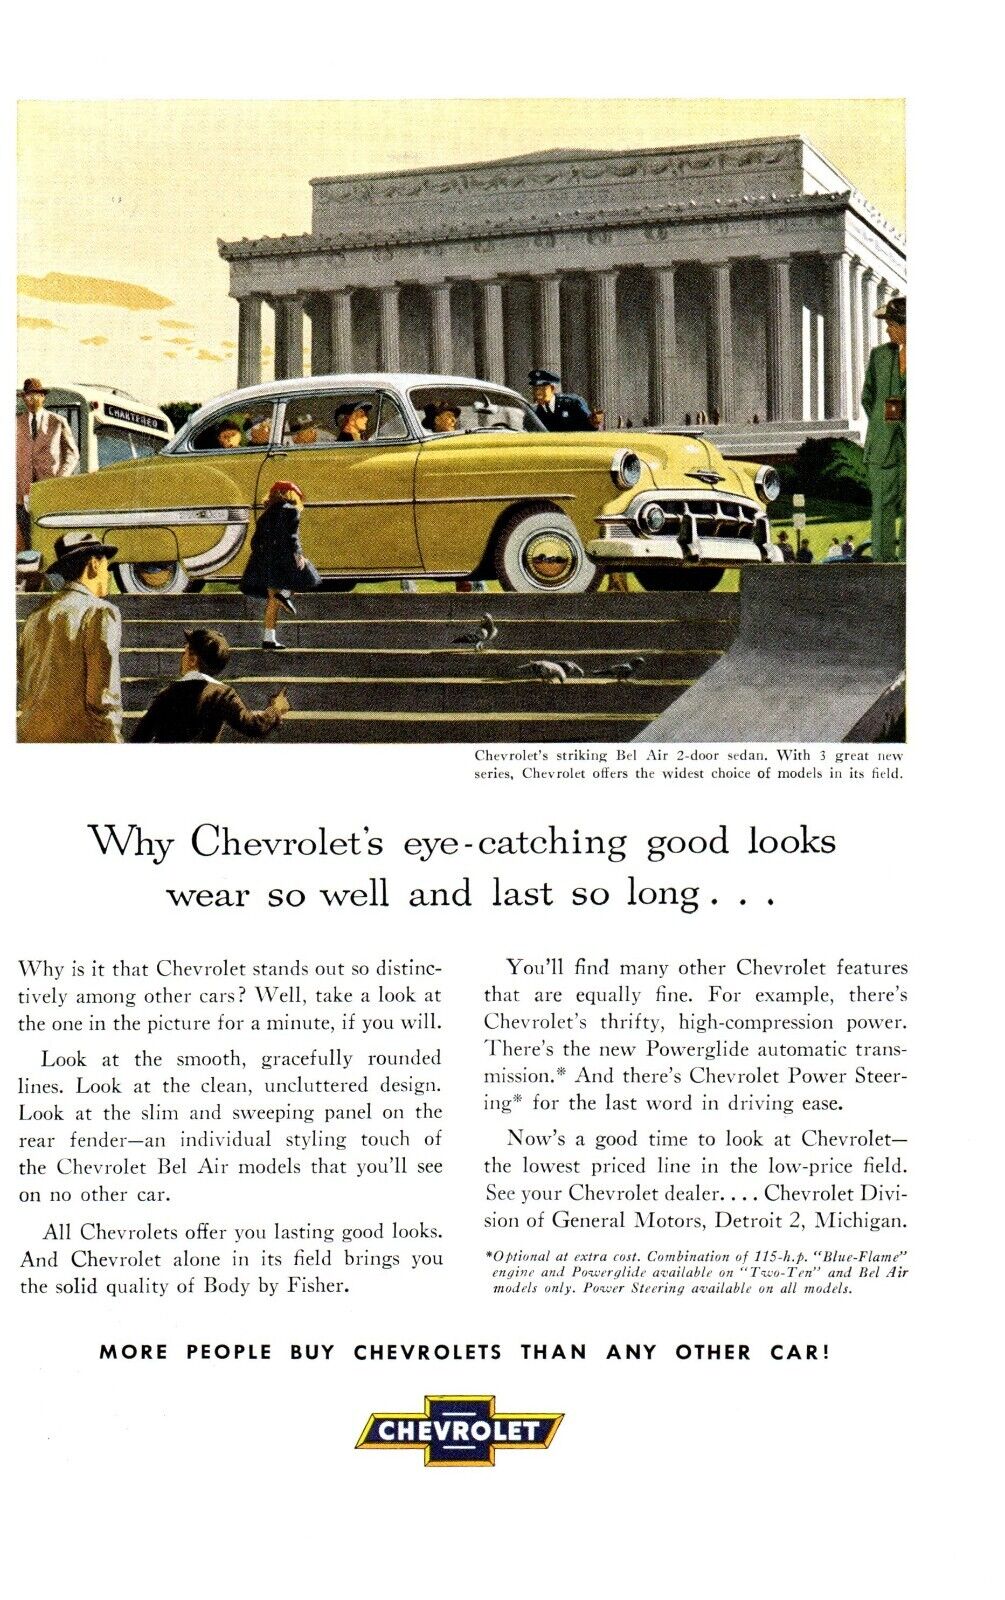 Chevrolet Chevy Bel Air White Walls Body by Fisher GM Print Advertisement 1953